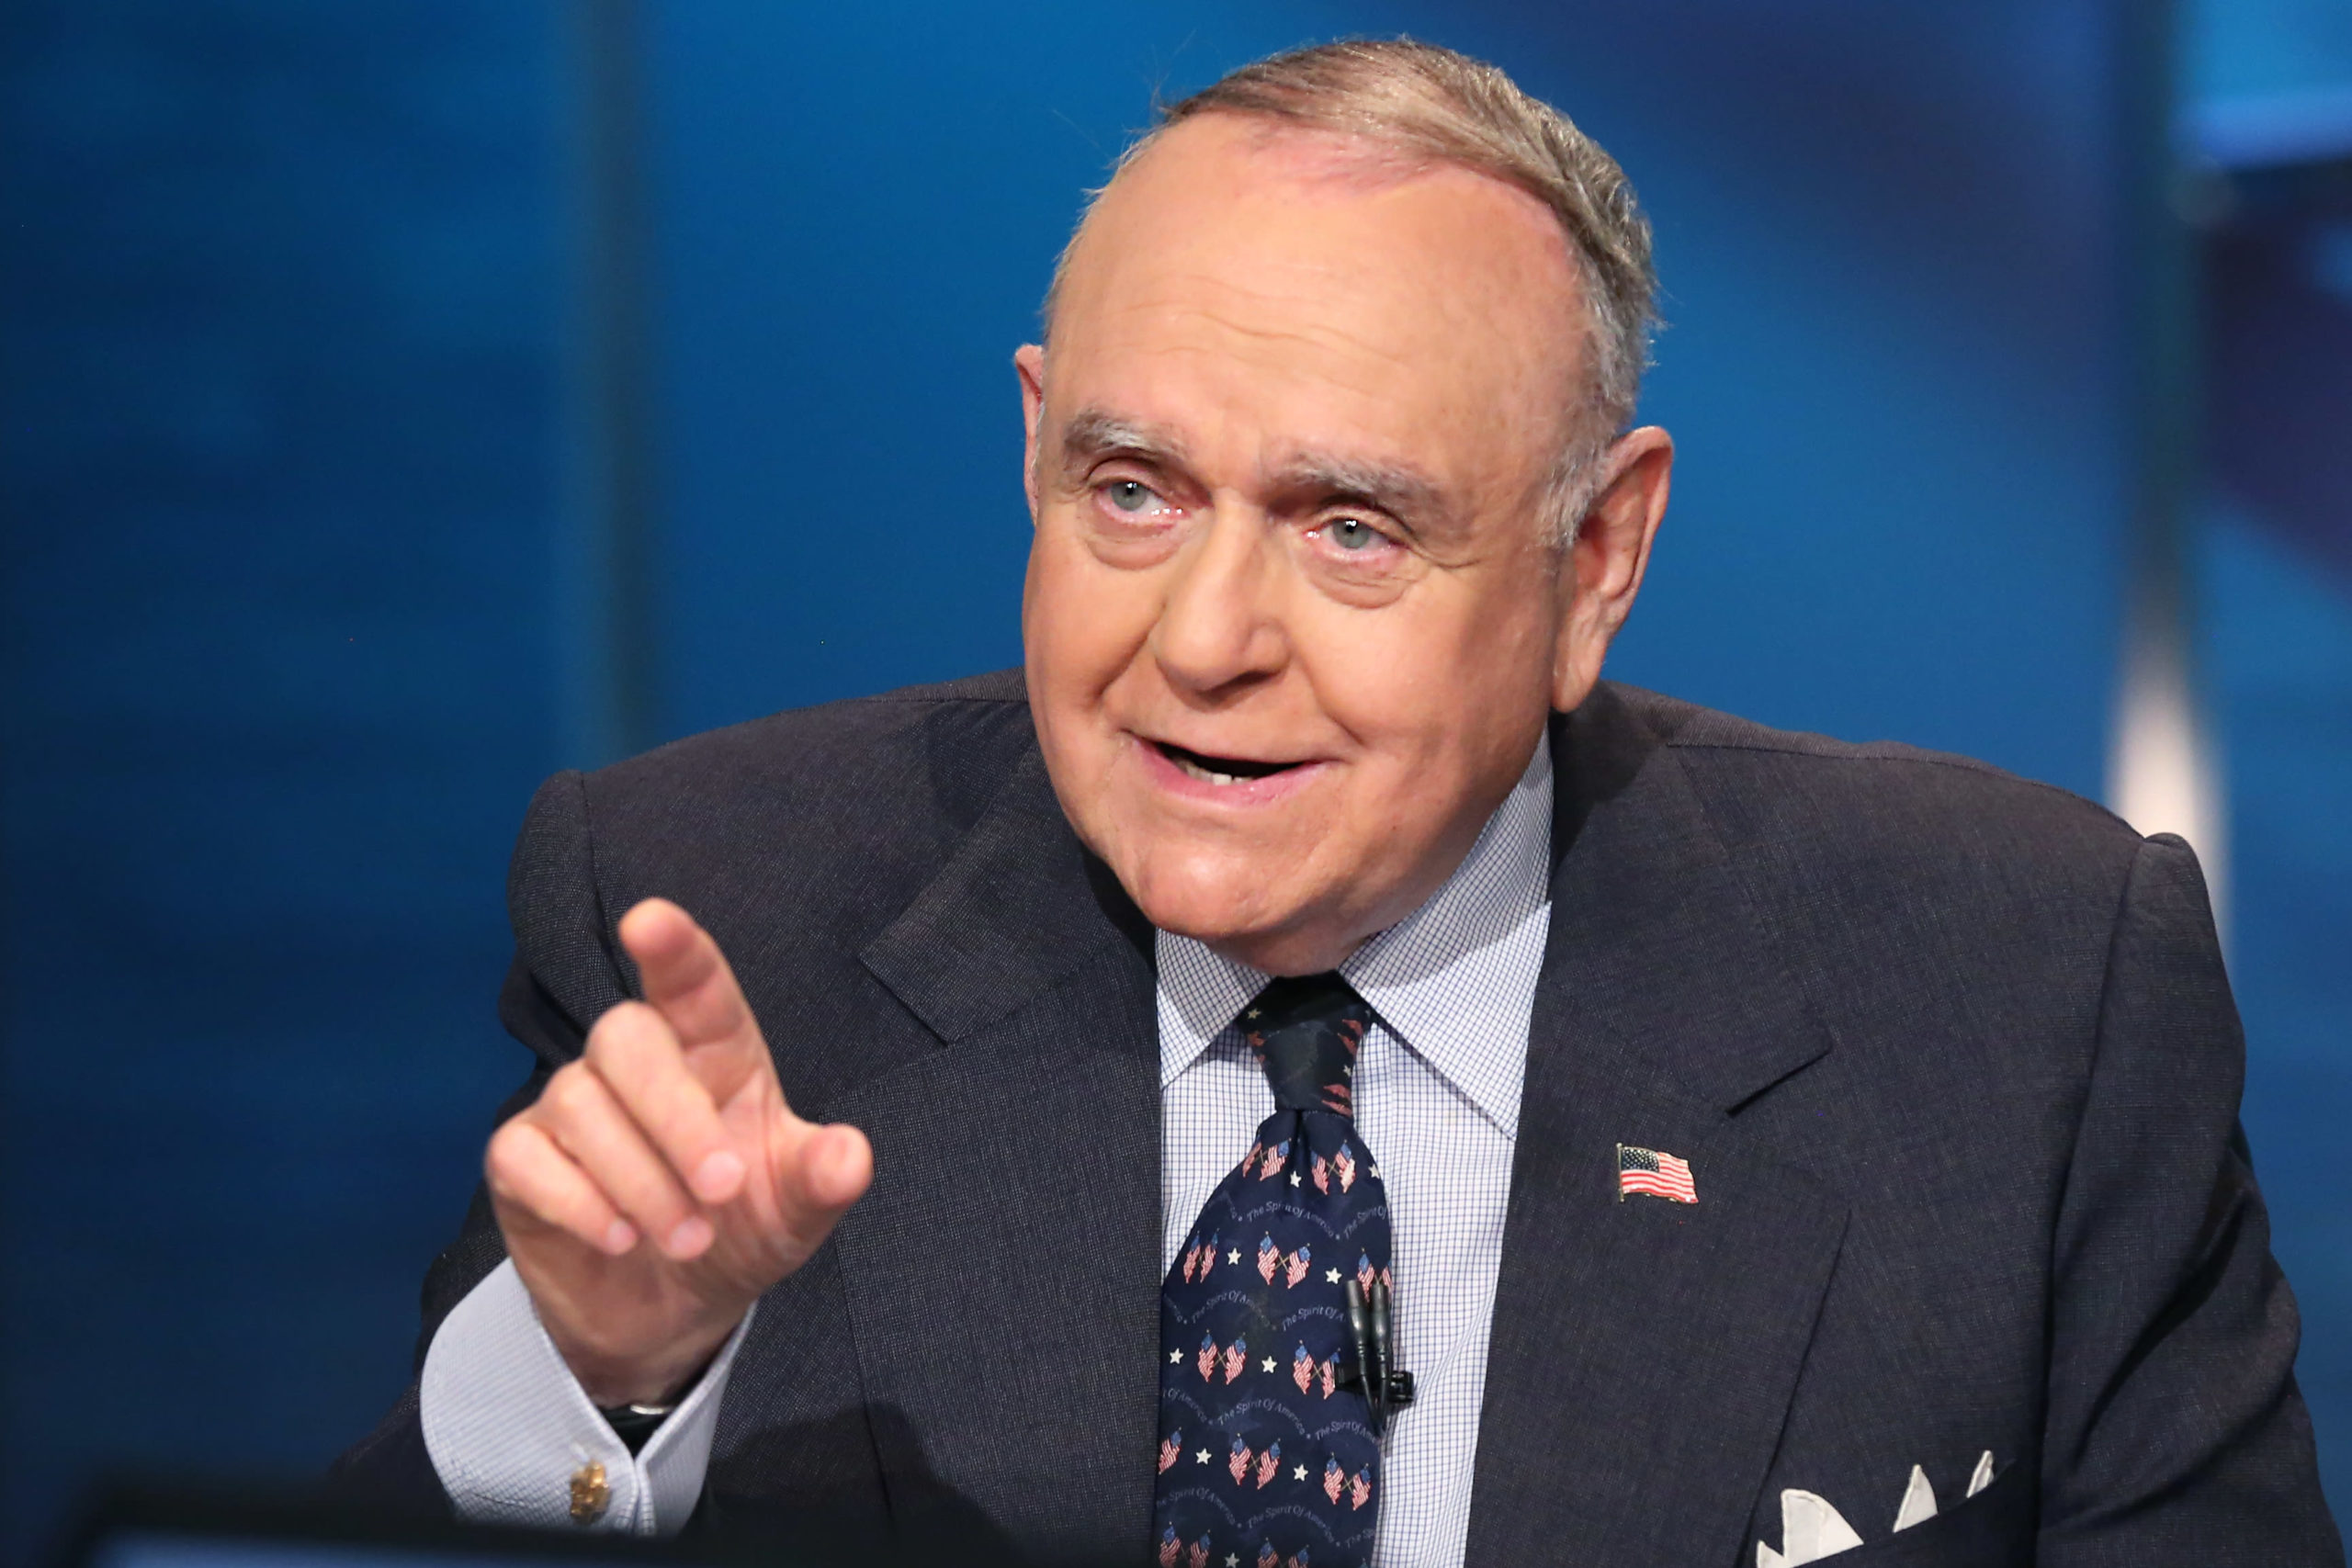 Leon Cooperman says the coronavirus crisis will change capitalism forever and taxes have to go up